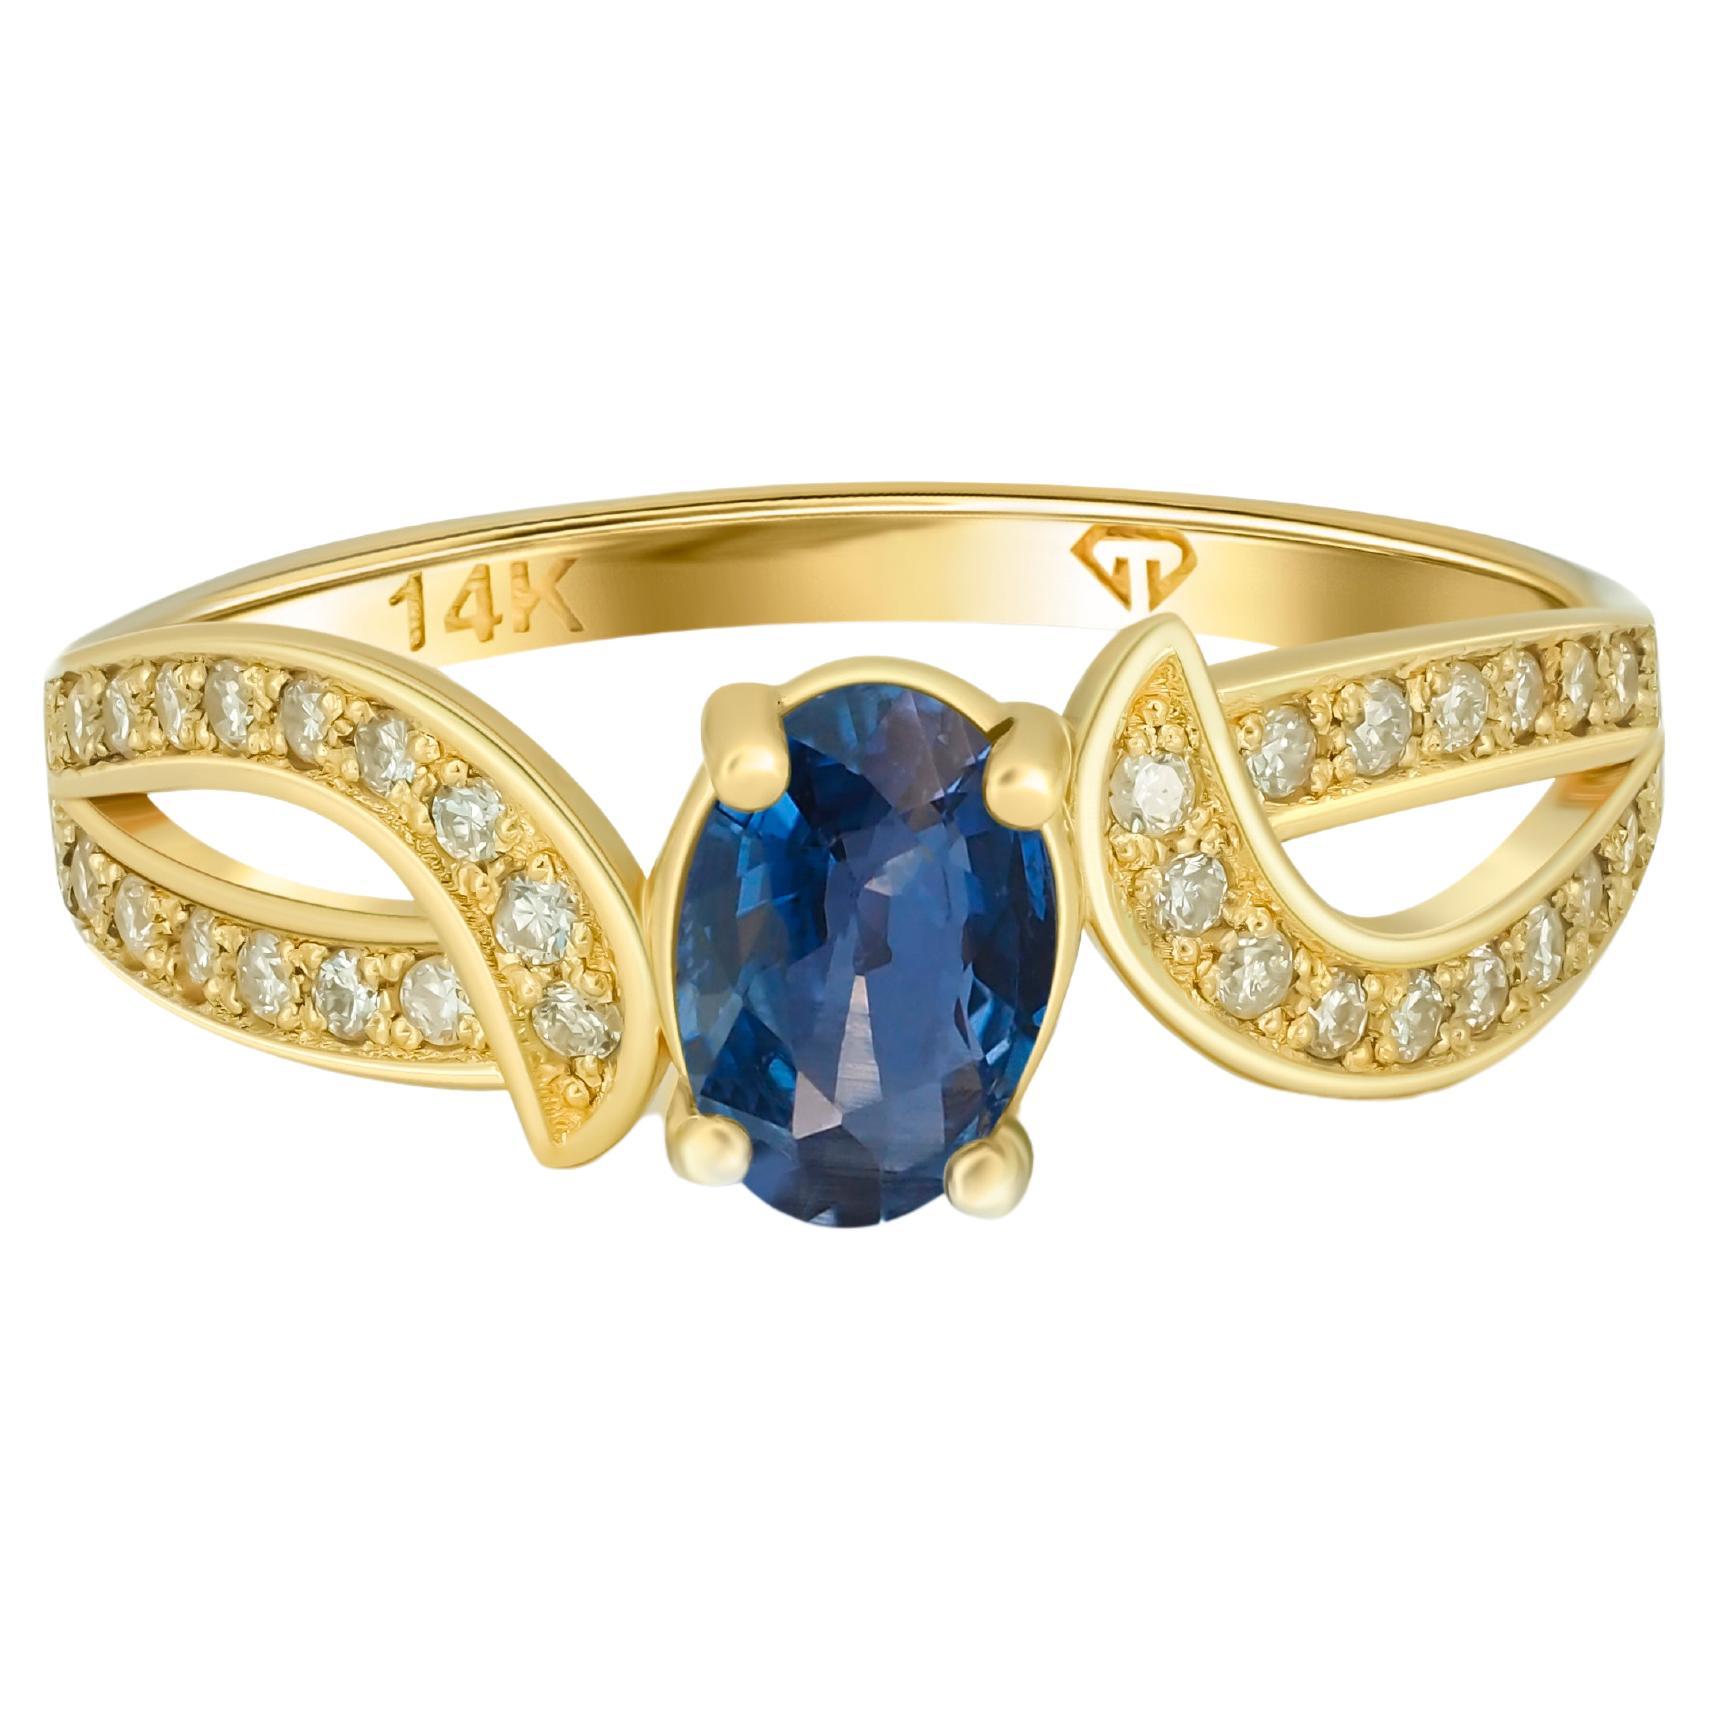 For Sale:  Genuine Sapphire 14k Gold Ring